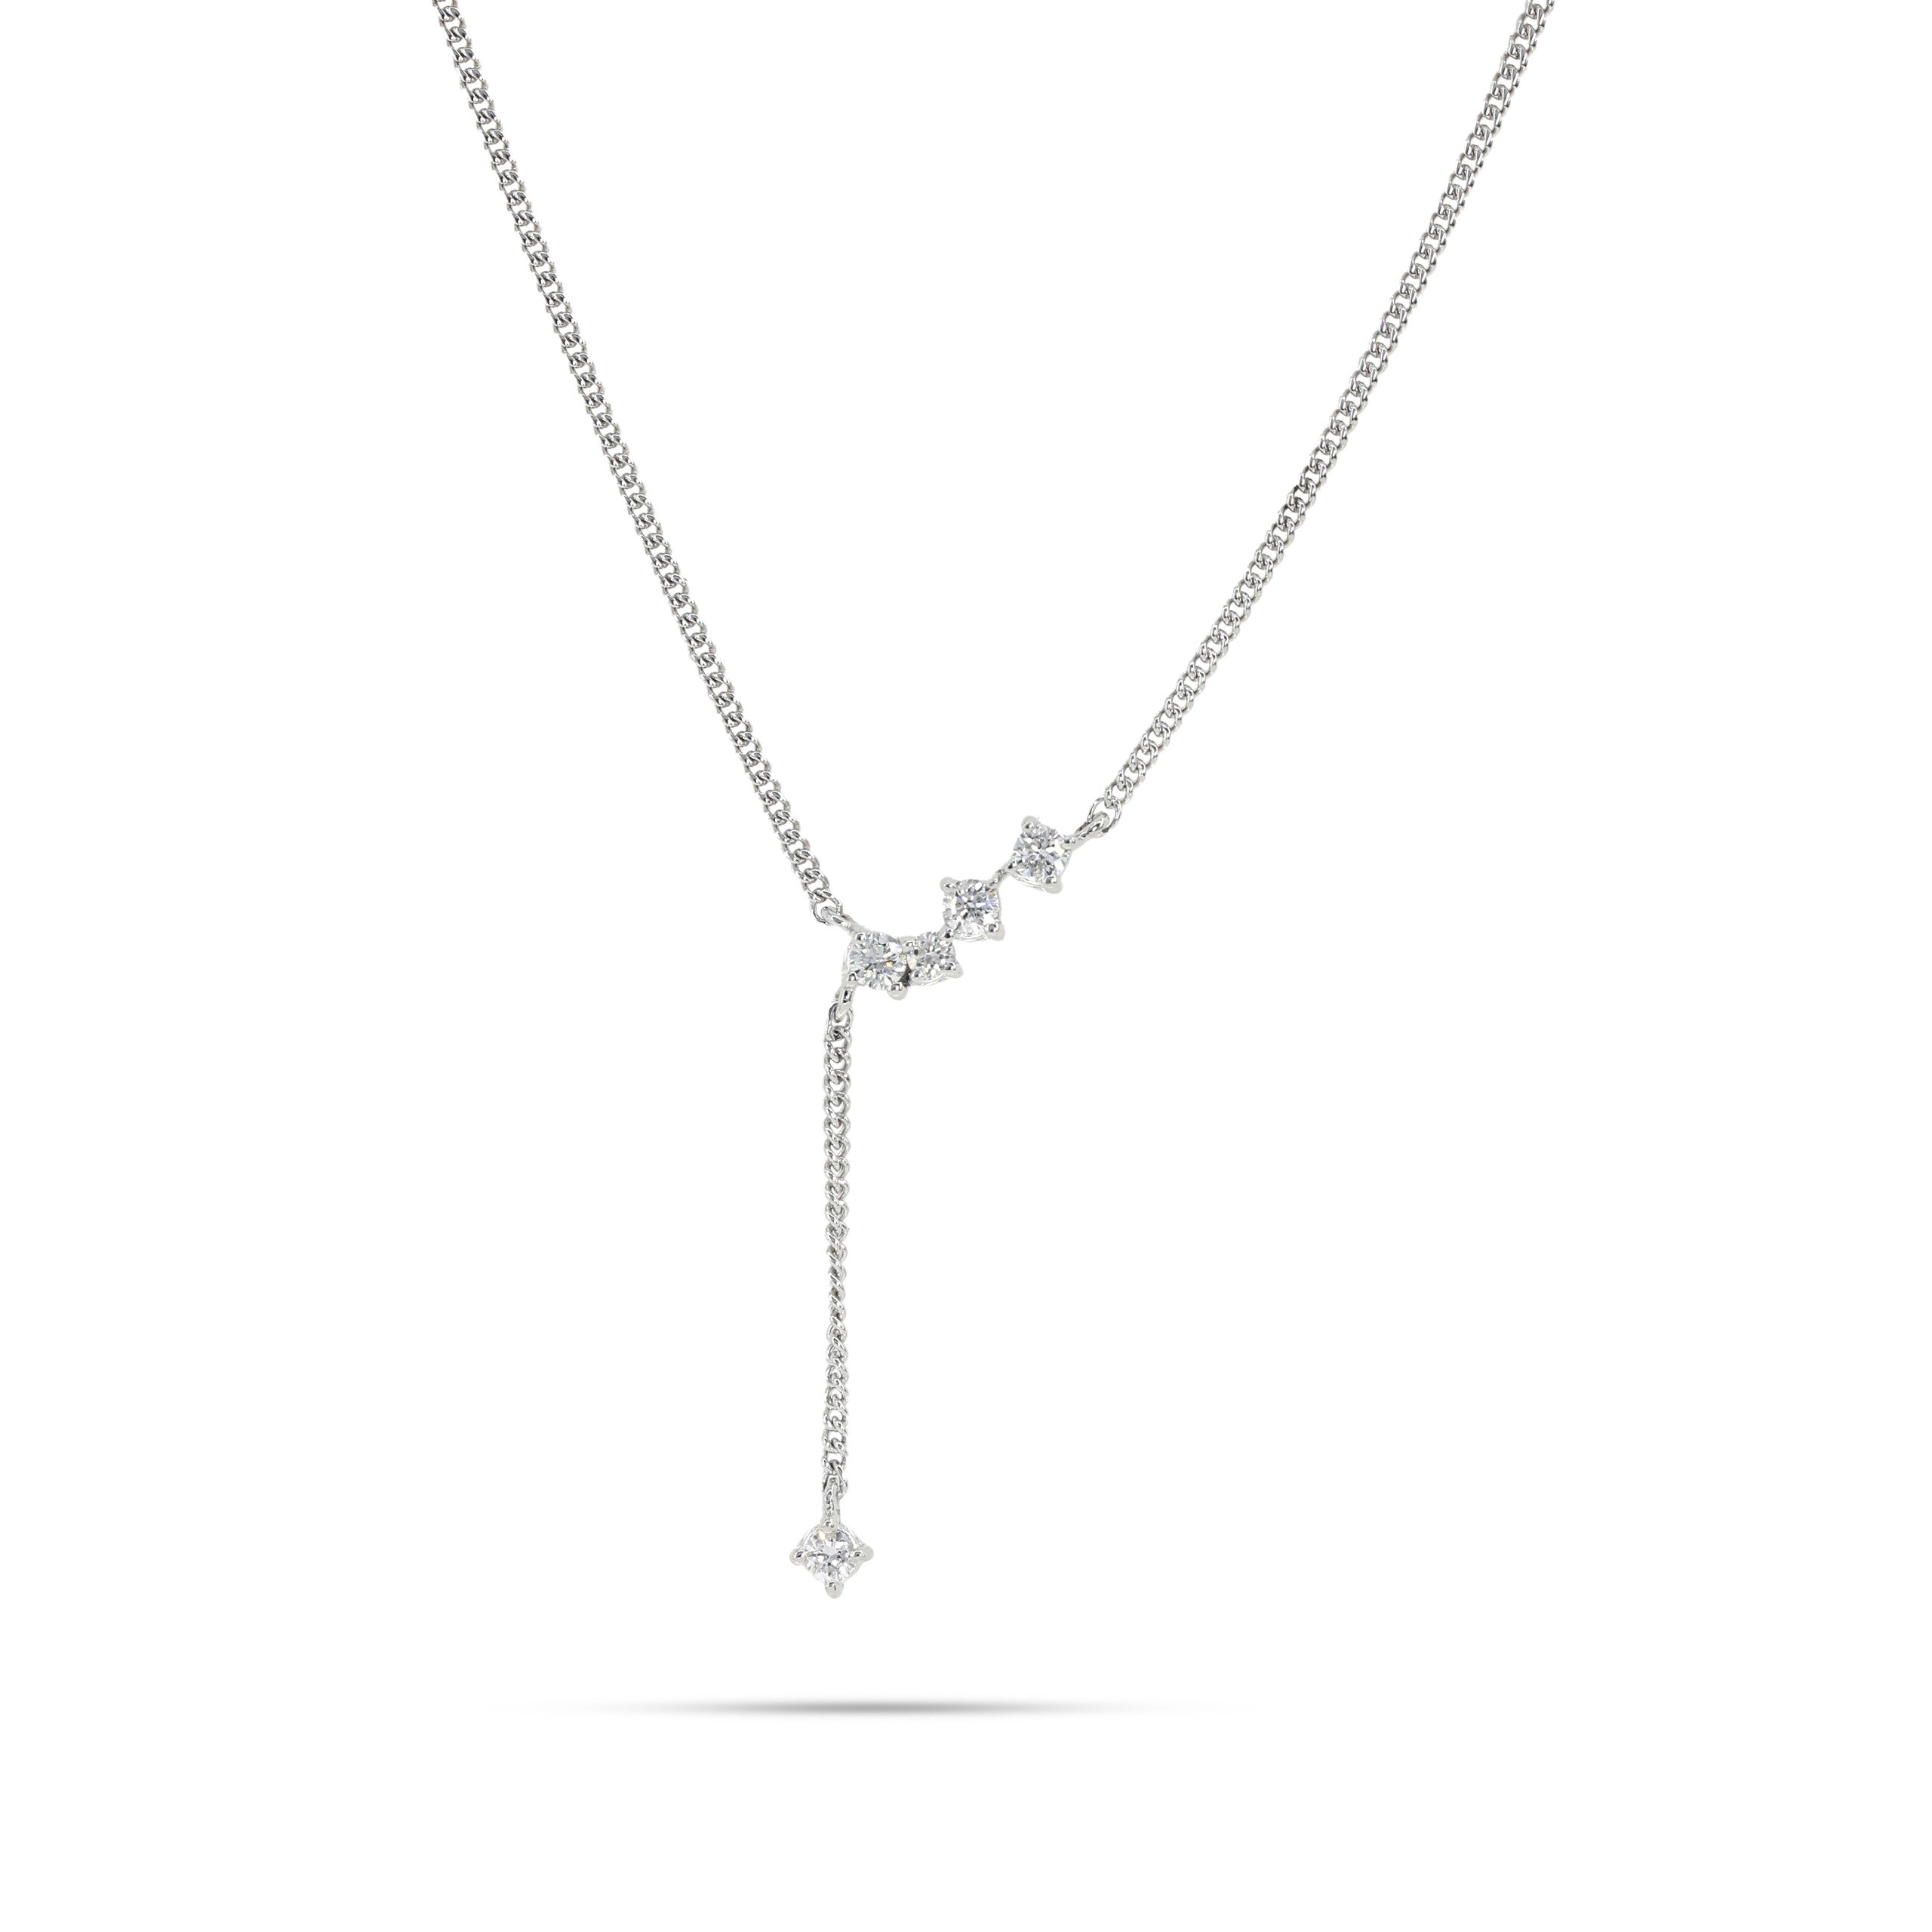 4 Round Dangling Diamonds Necklace in White 18 K Gold - SIR1271